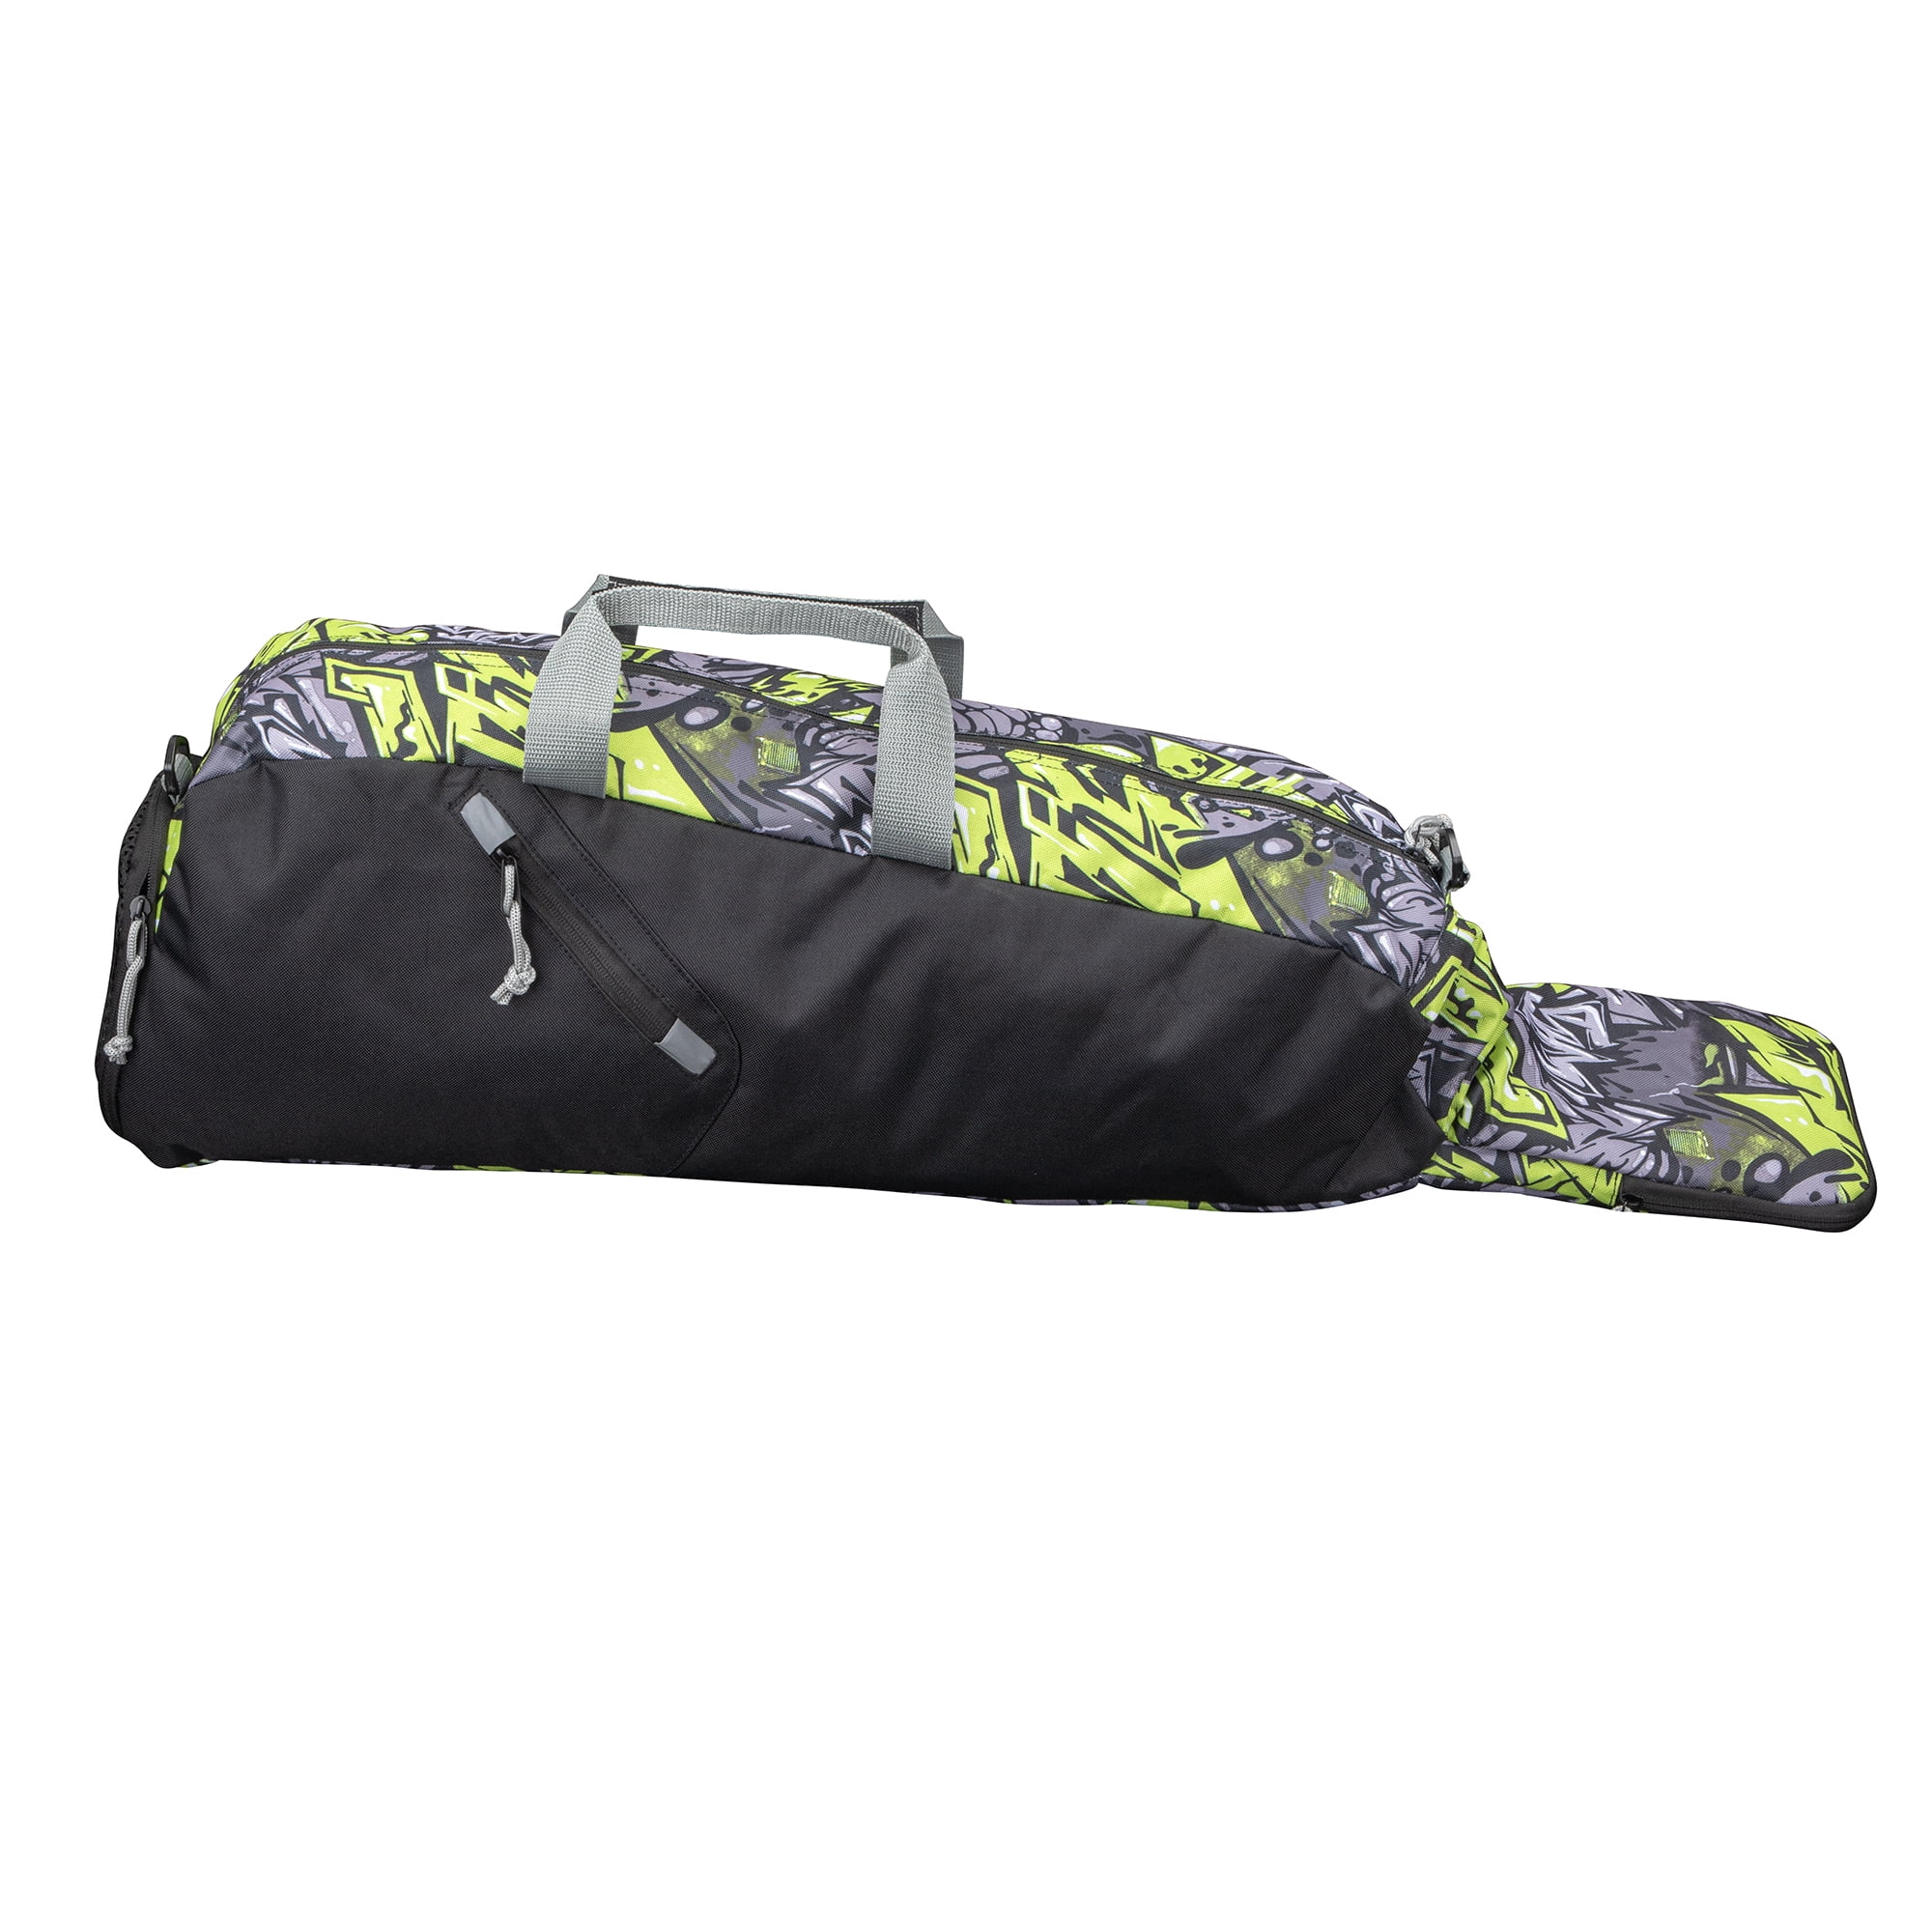 Softball Equipment Bag for Youth & Kids Includes Vented Compartment J Style Fence Hook Adjustable Shoulder Strap T-Ball Ortiz34 Youth Bat Bag- David Ortiz's Baseball 